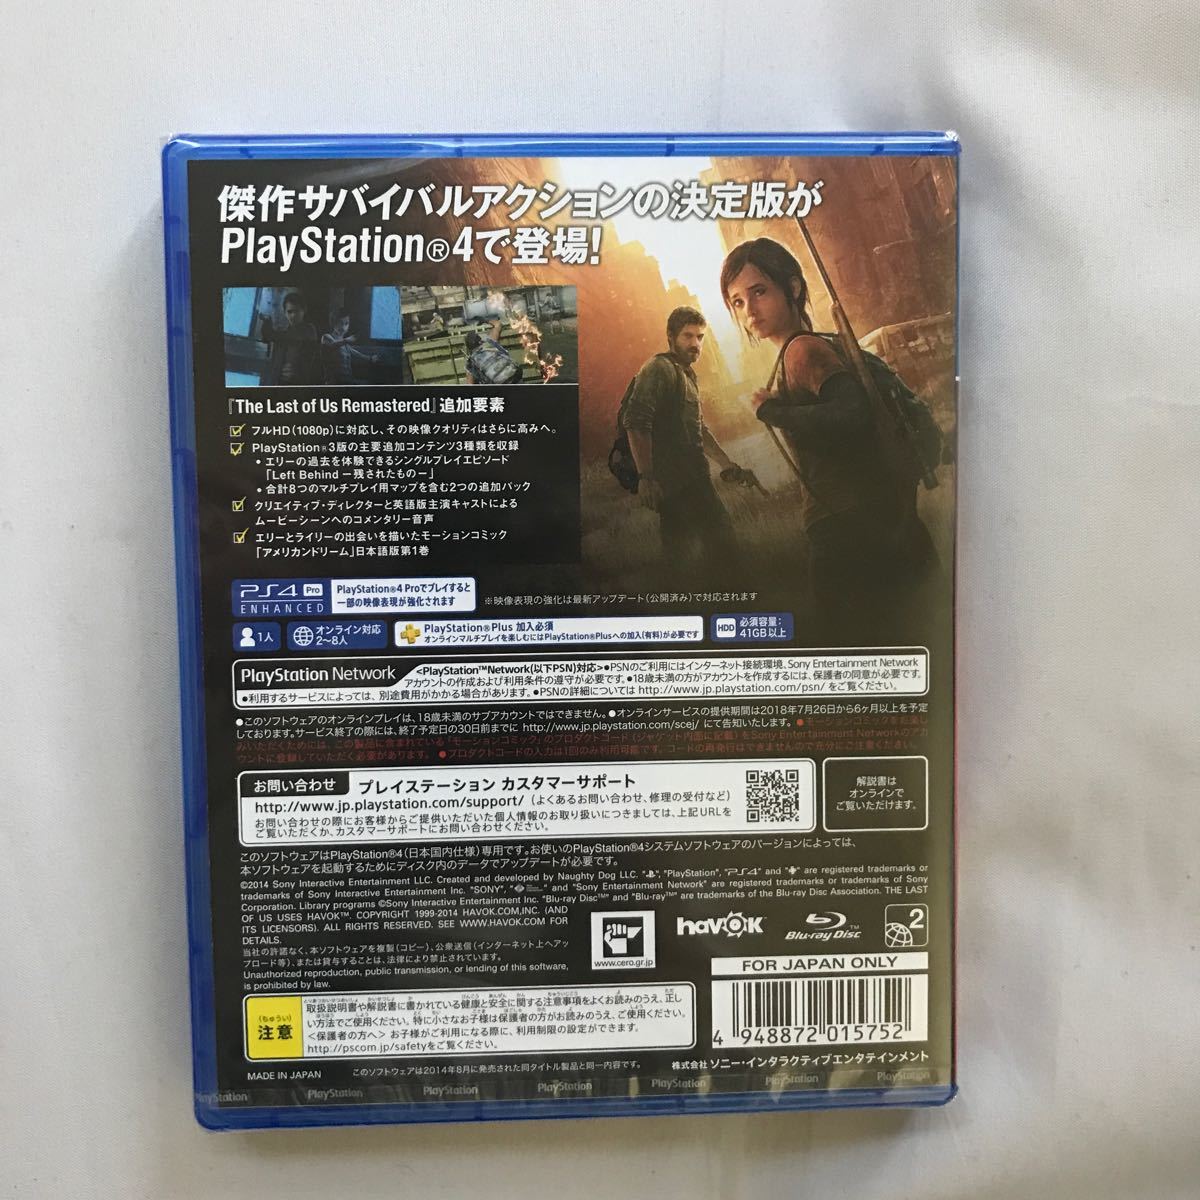 【PS4】 The Last of Us Remastered [PlayStation Hits]